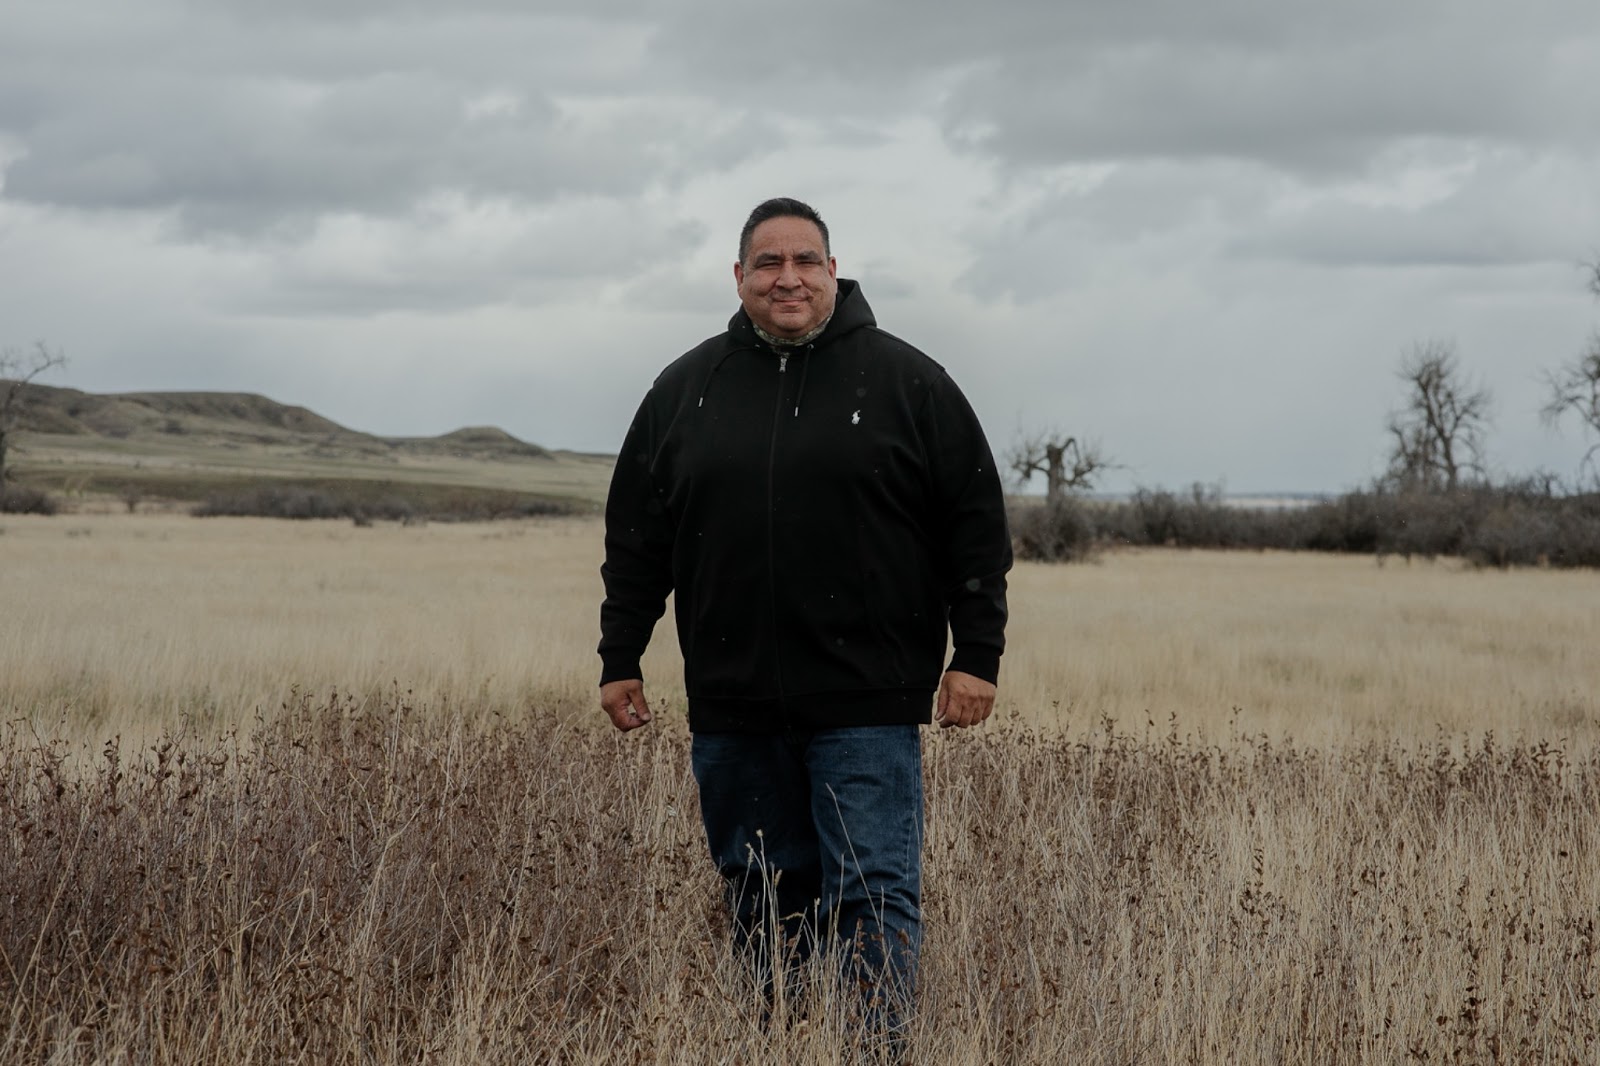 An Indigenous man in a black hoodie stands in a field against a cloudy sky